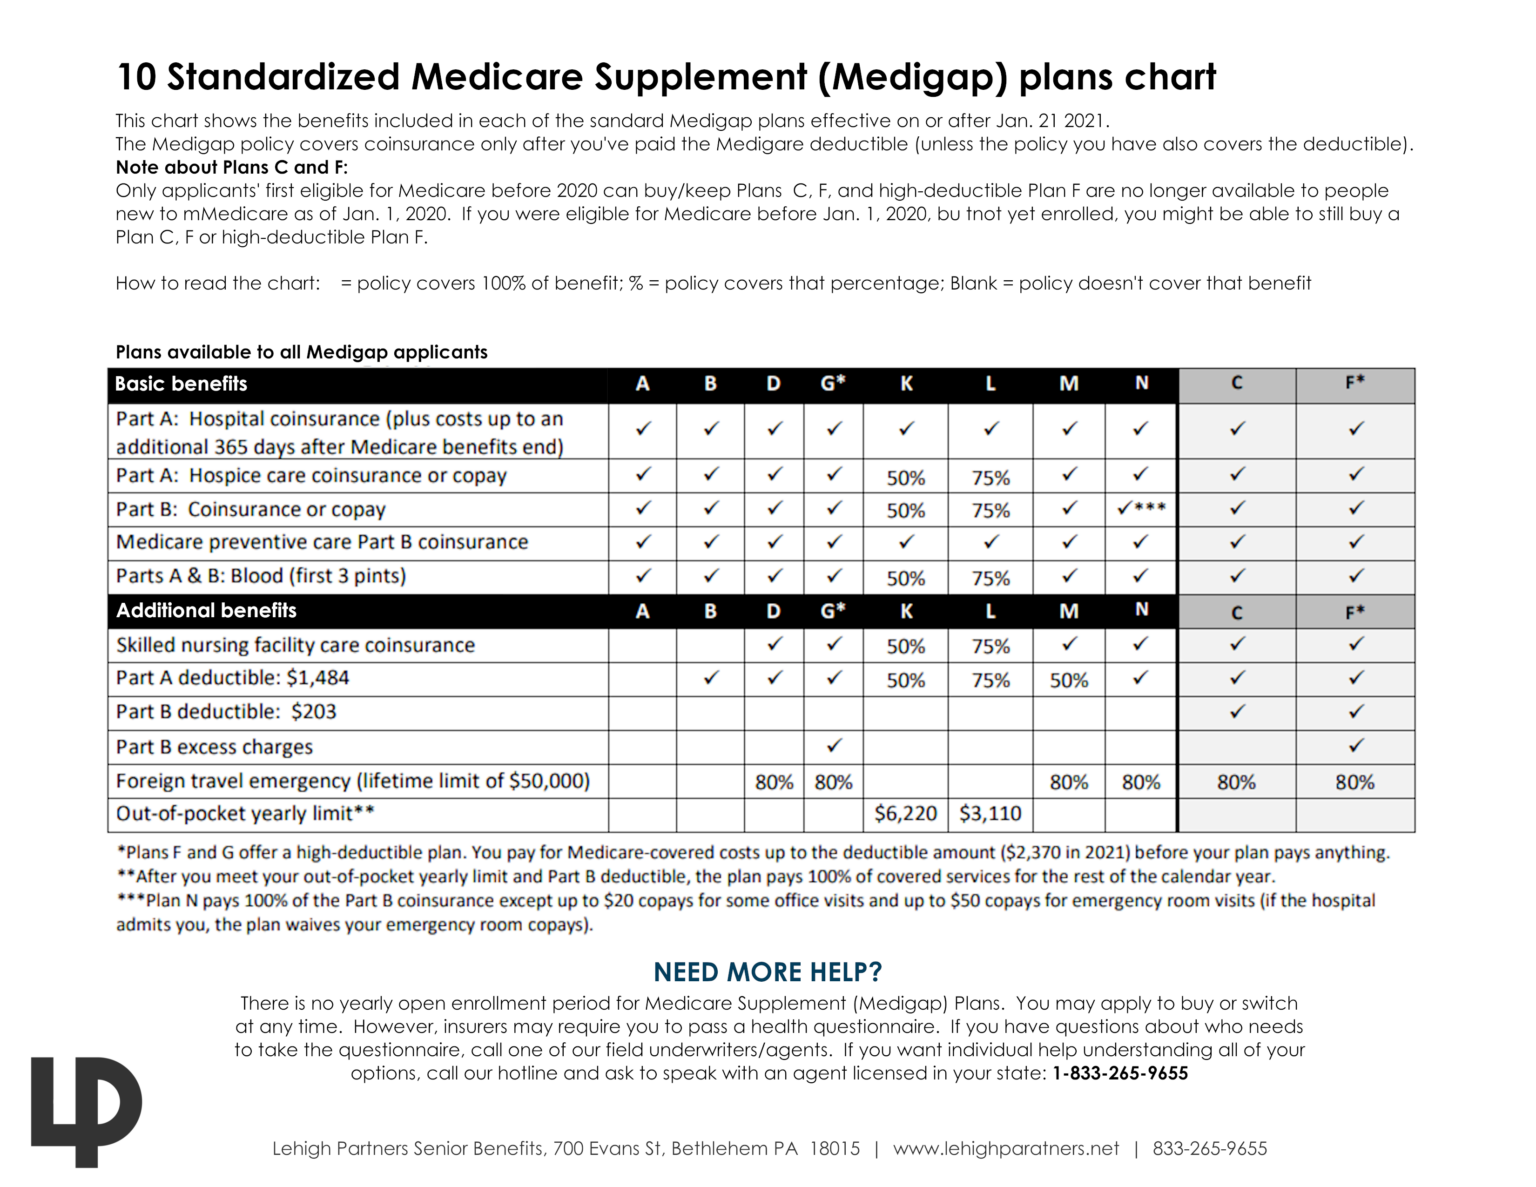 What is the Most Popular Medicare Supplement Plan in 2021